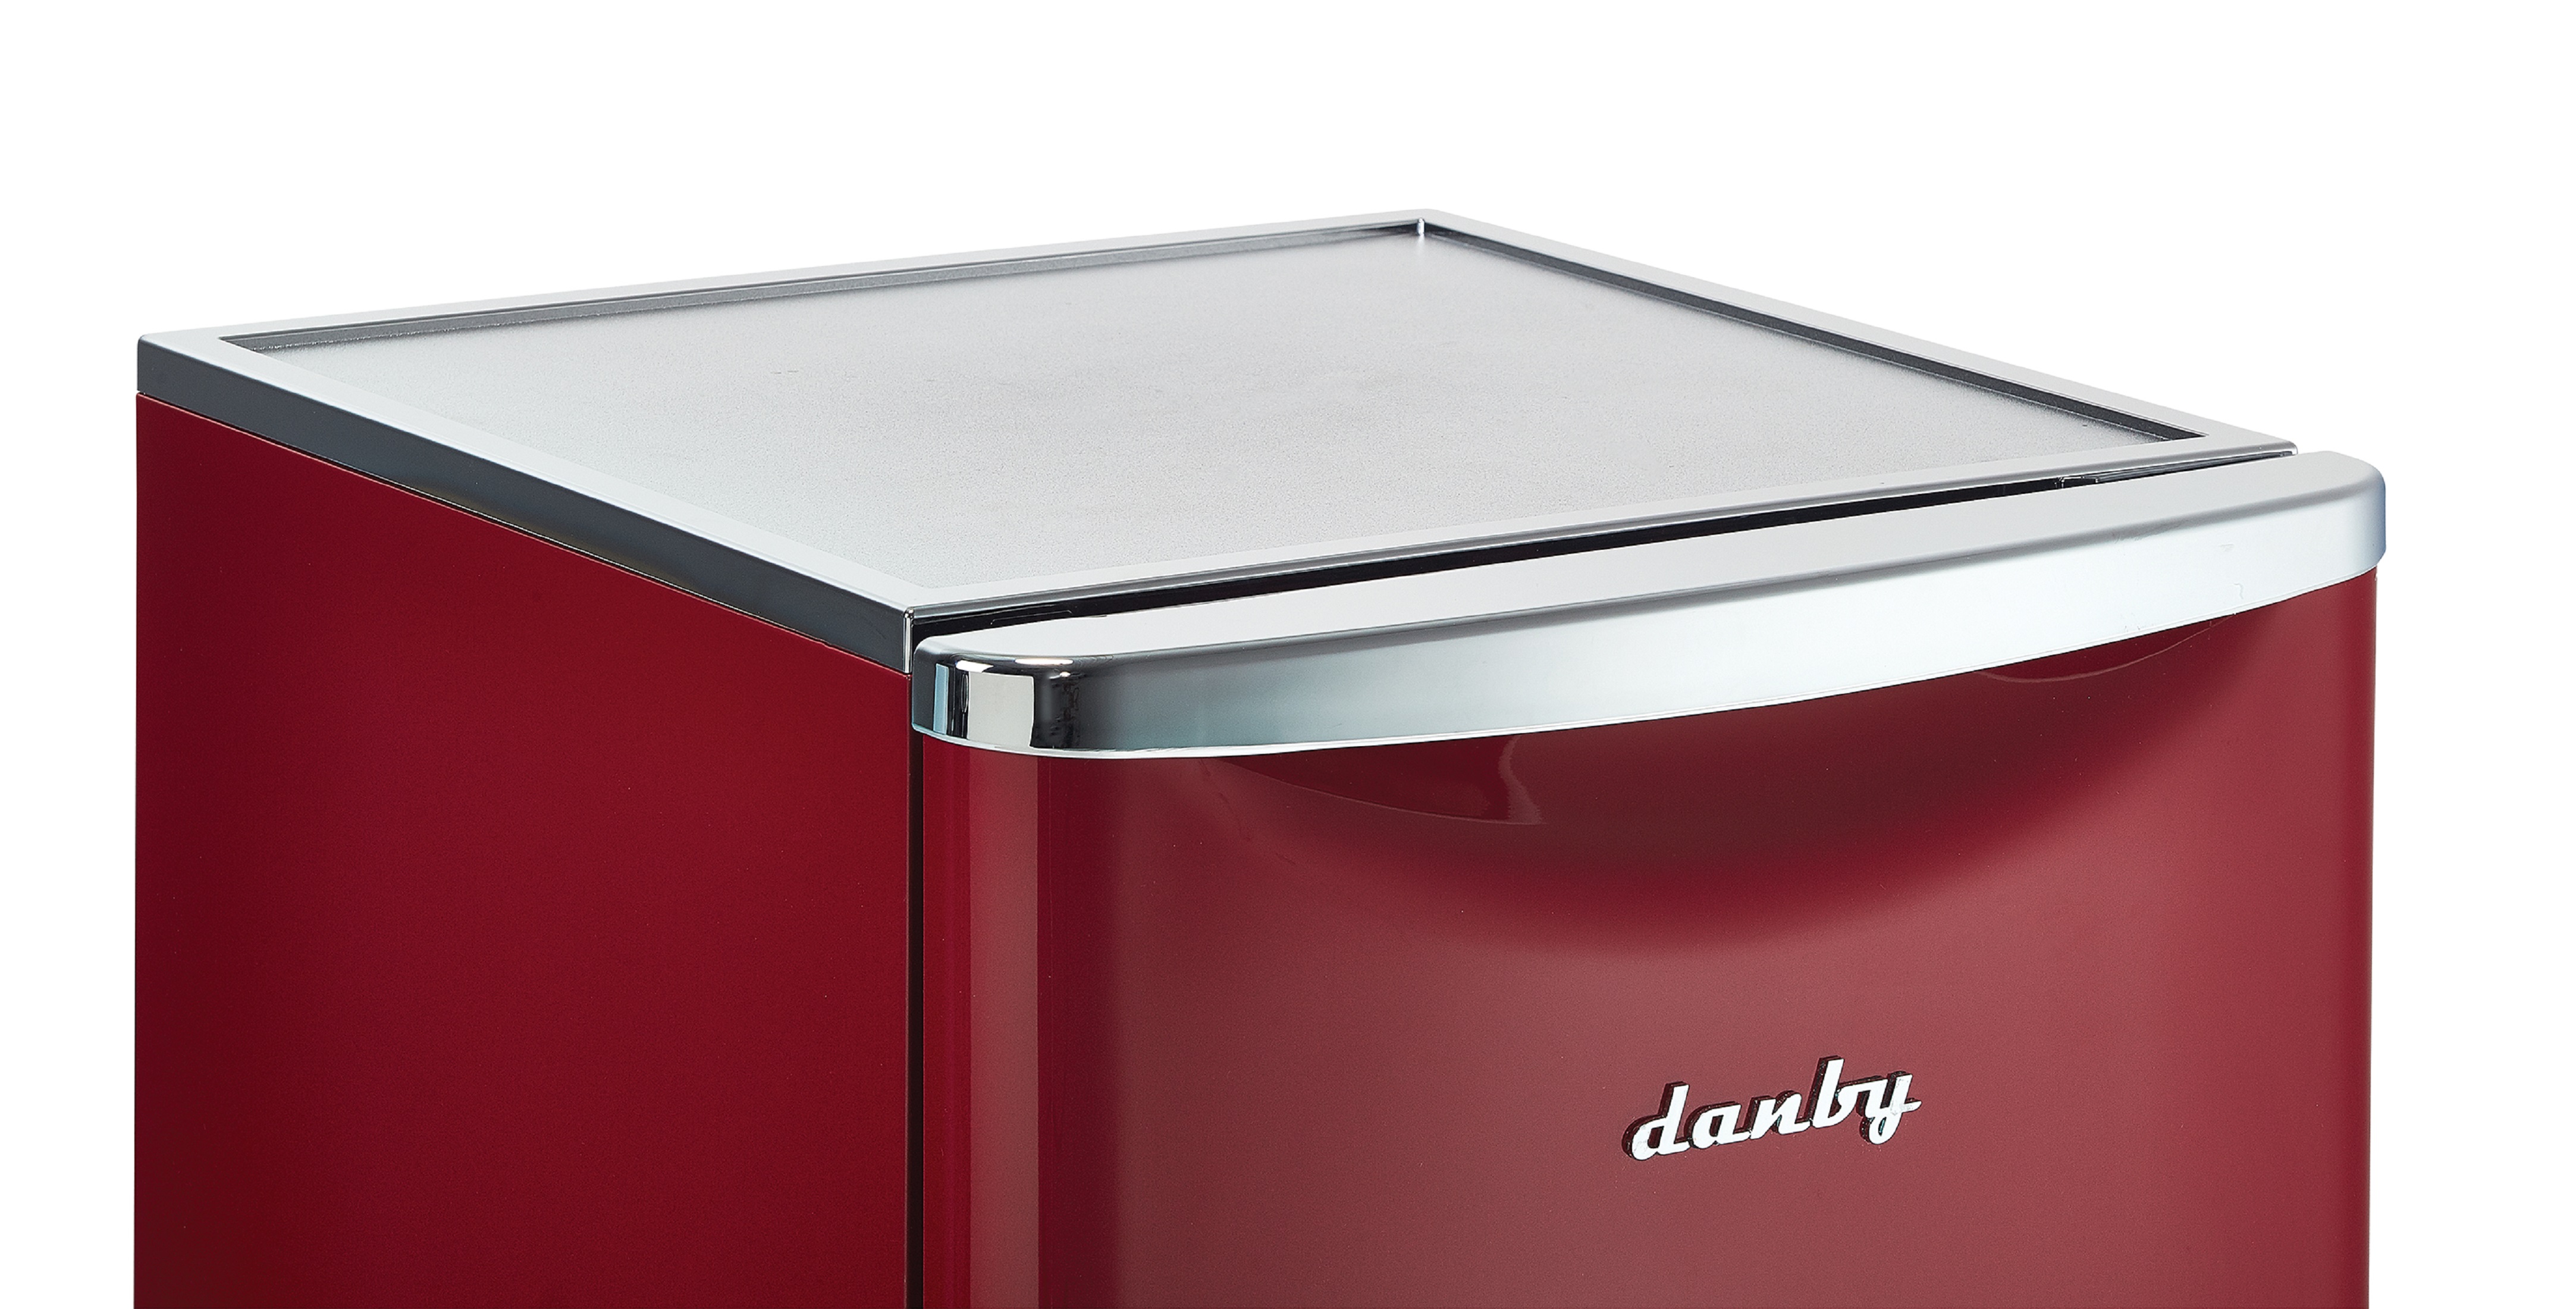 Danby DAR044A6LDB 4.4 Cu. Ft. (124 L) Capacity Retro Mini All-Refrigerator in Metallic Red Featuring Danby’s patented design and Energy Star Compliant - image 3 of 9